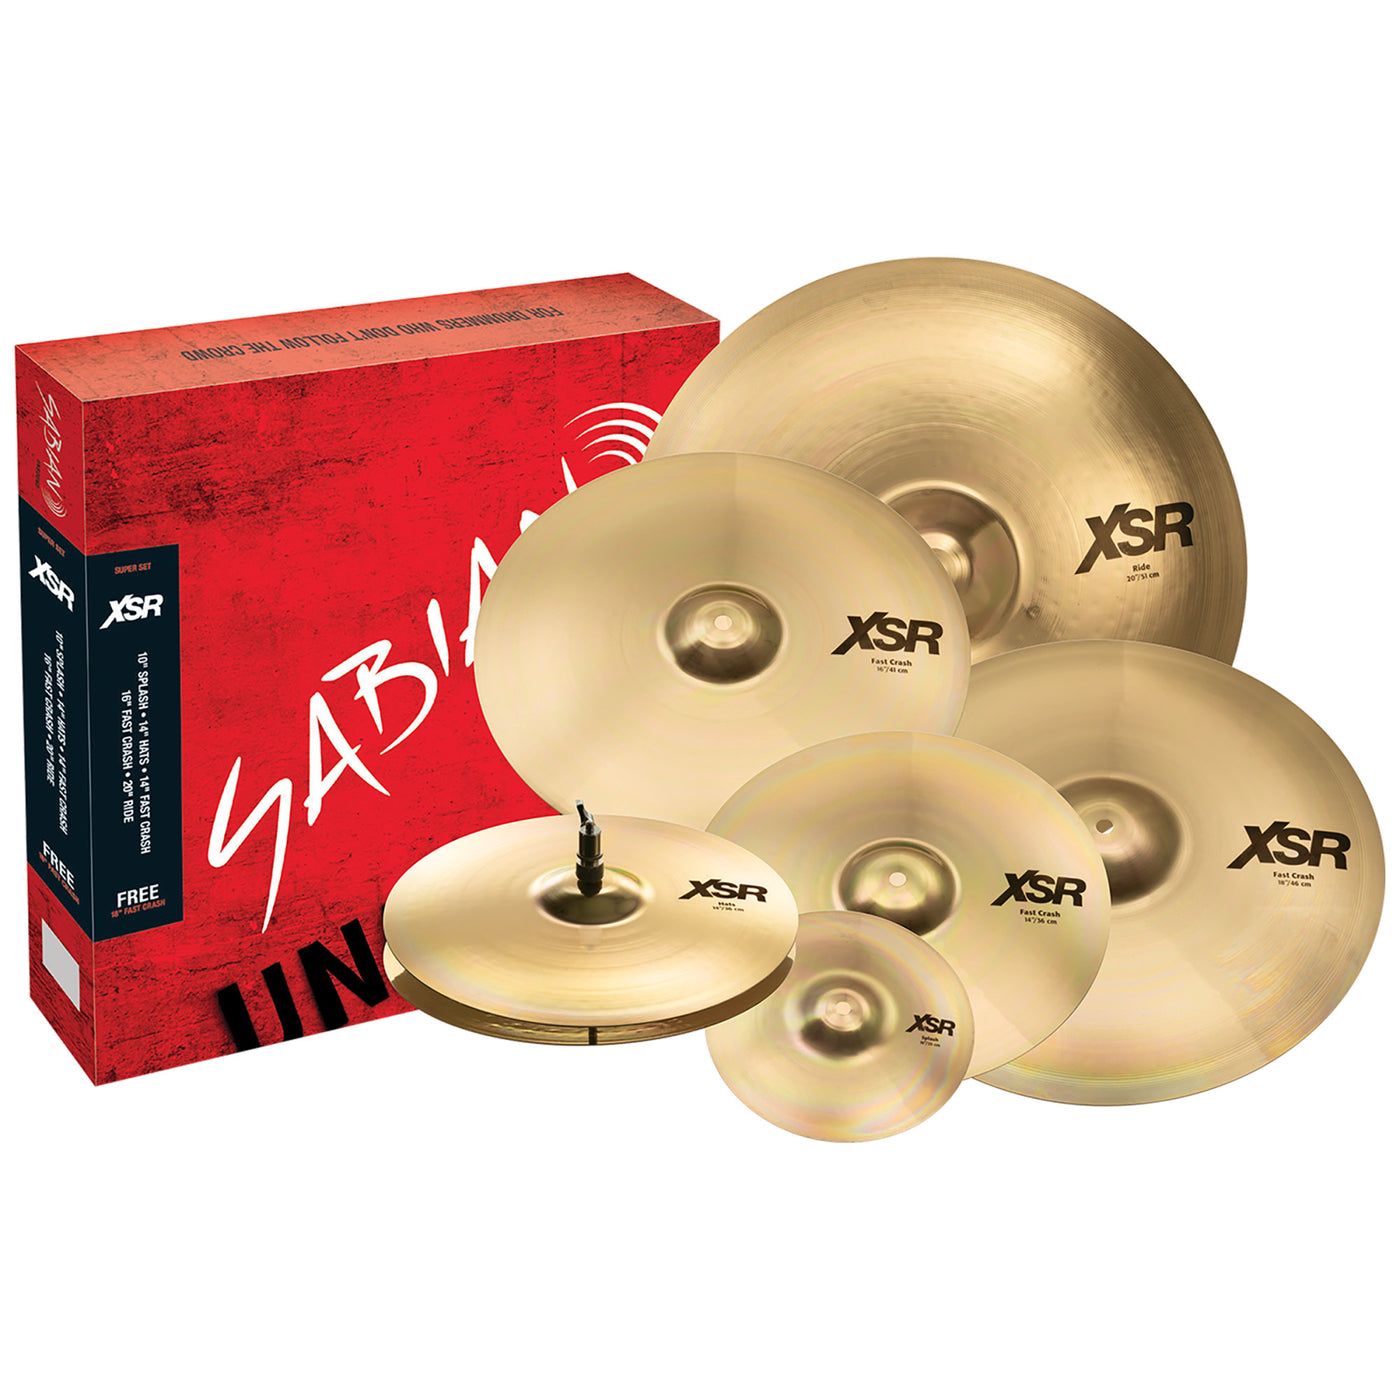 Sabian XSR Super Cymbal Pack with Free 10/18" Cymbals